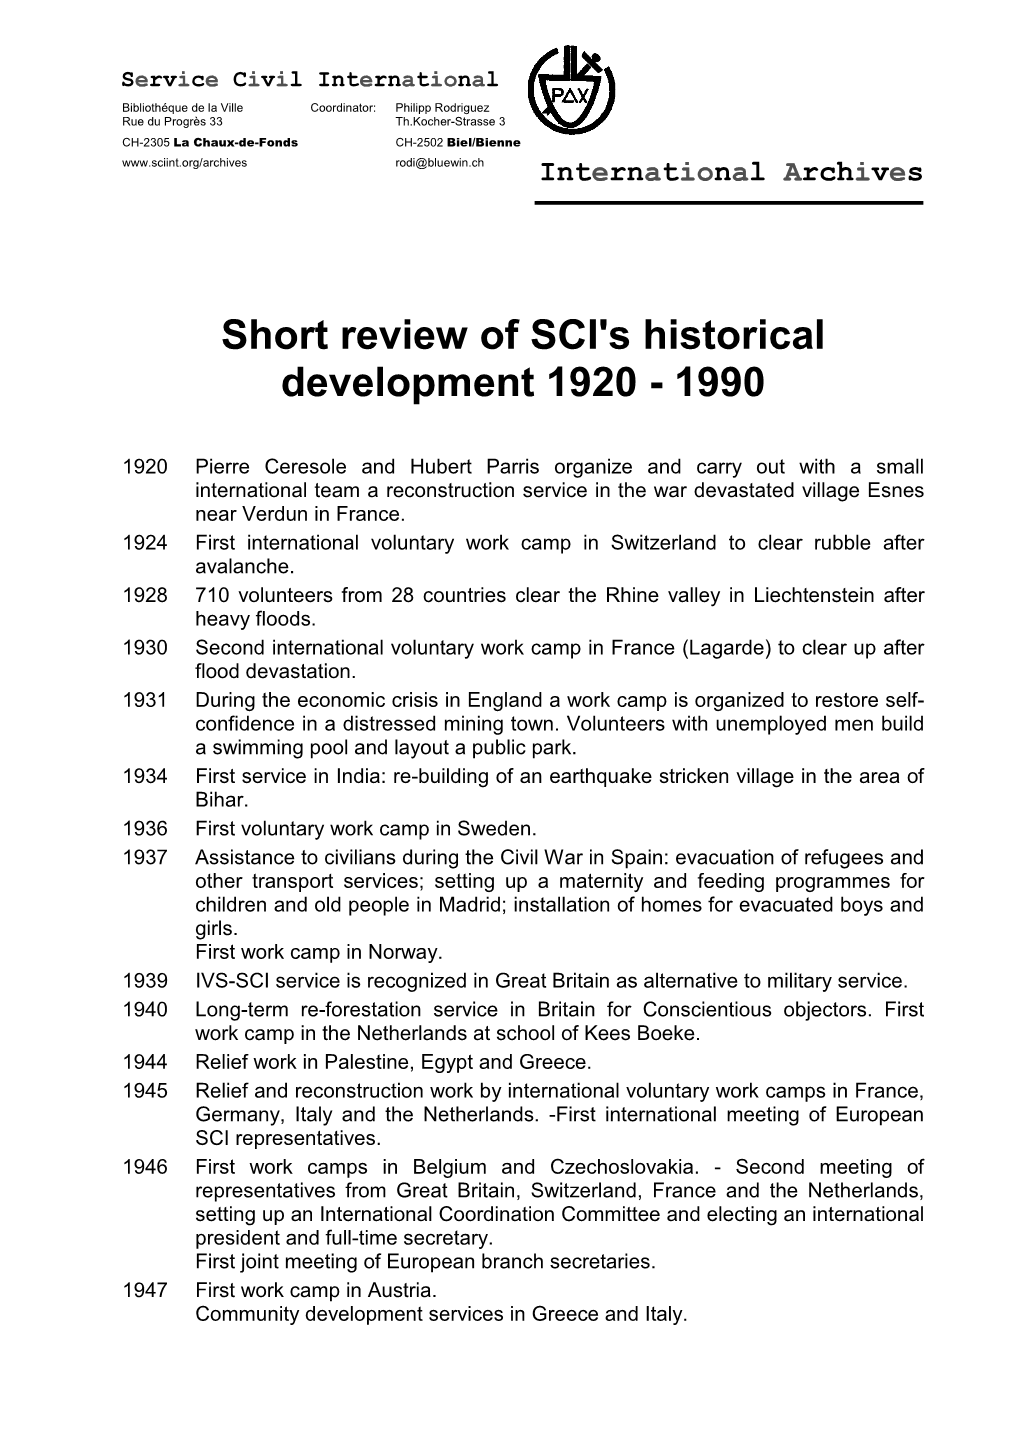 Short Review of SCI's Historical Development 1920 - 1990